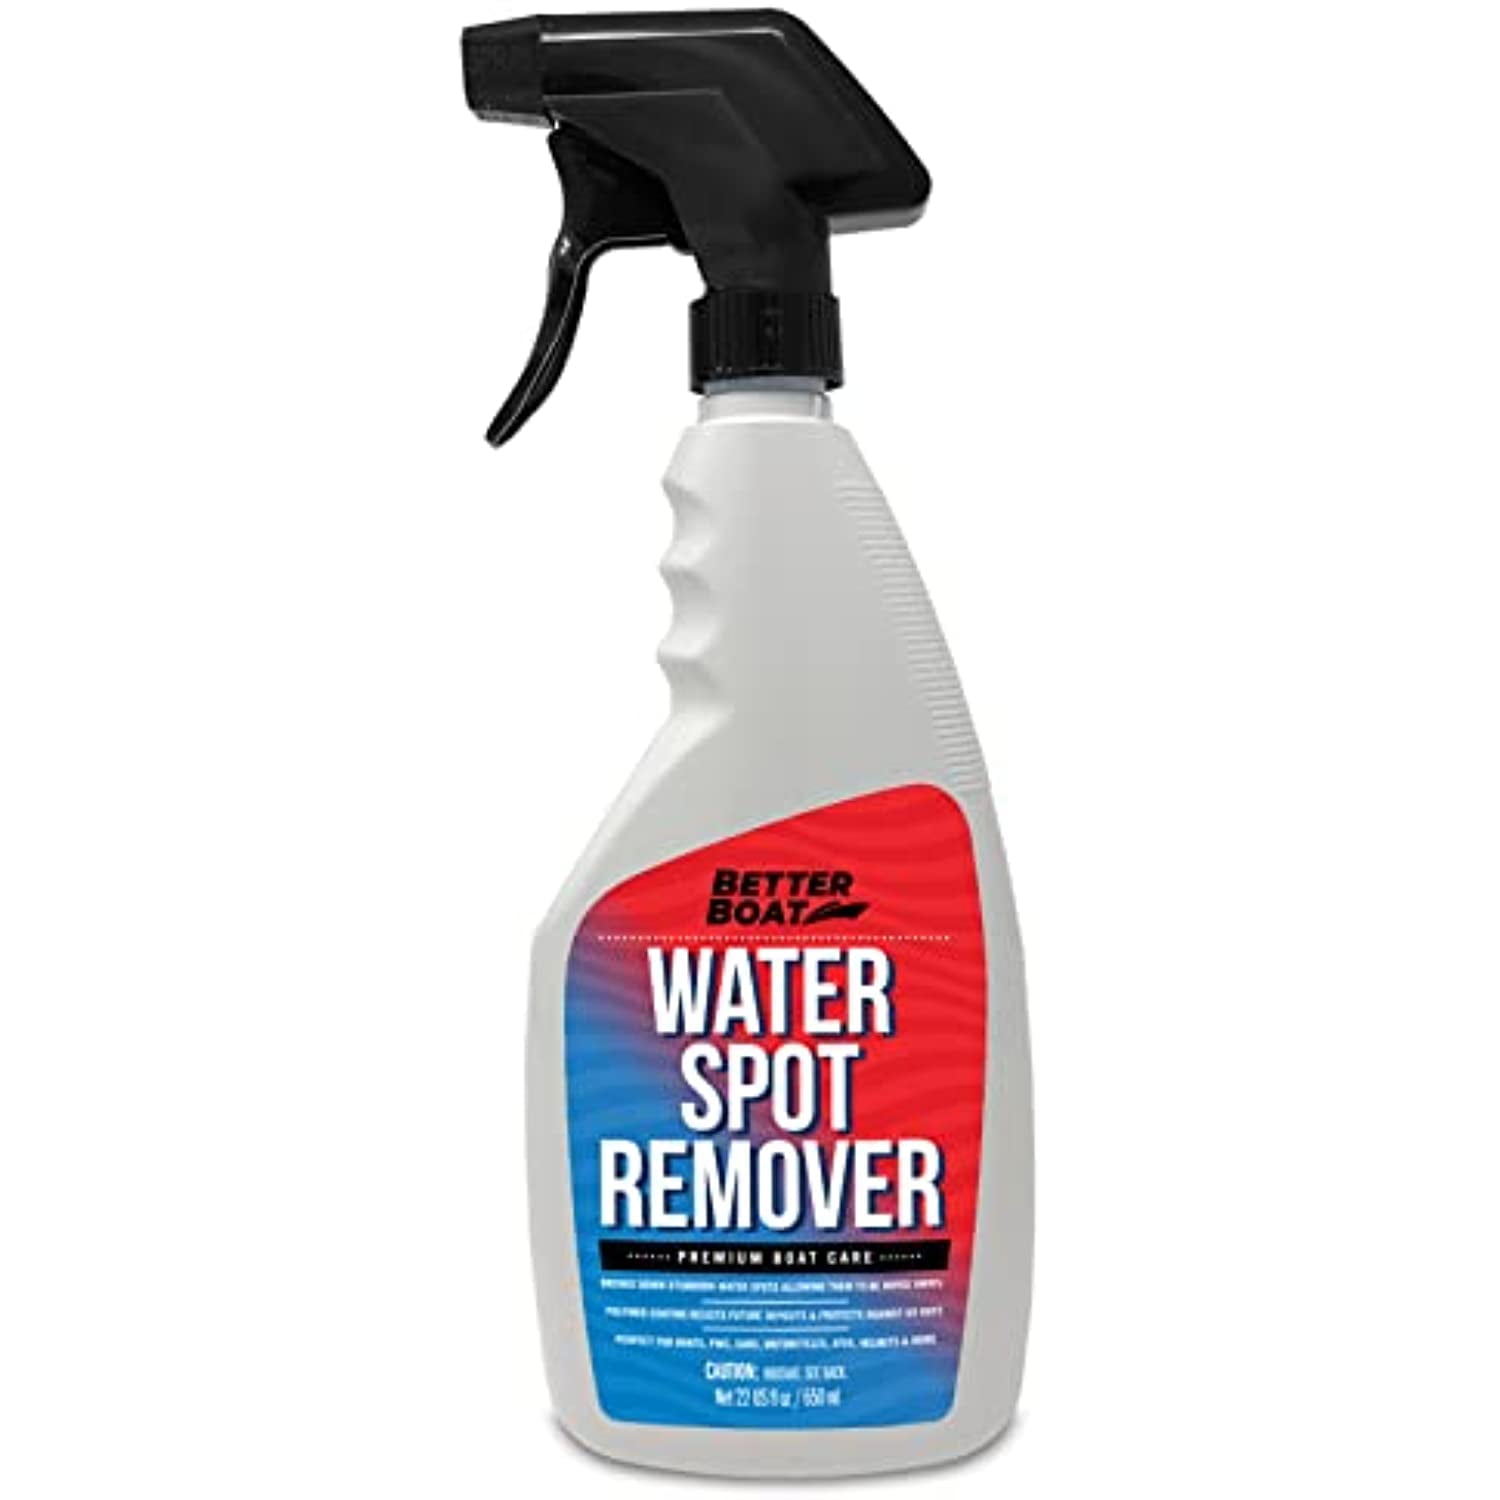 Hard Water Spot Remover for Boats & Cars | Better Boat